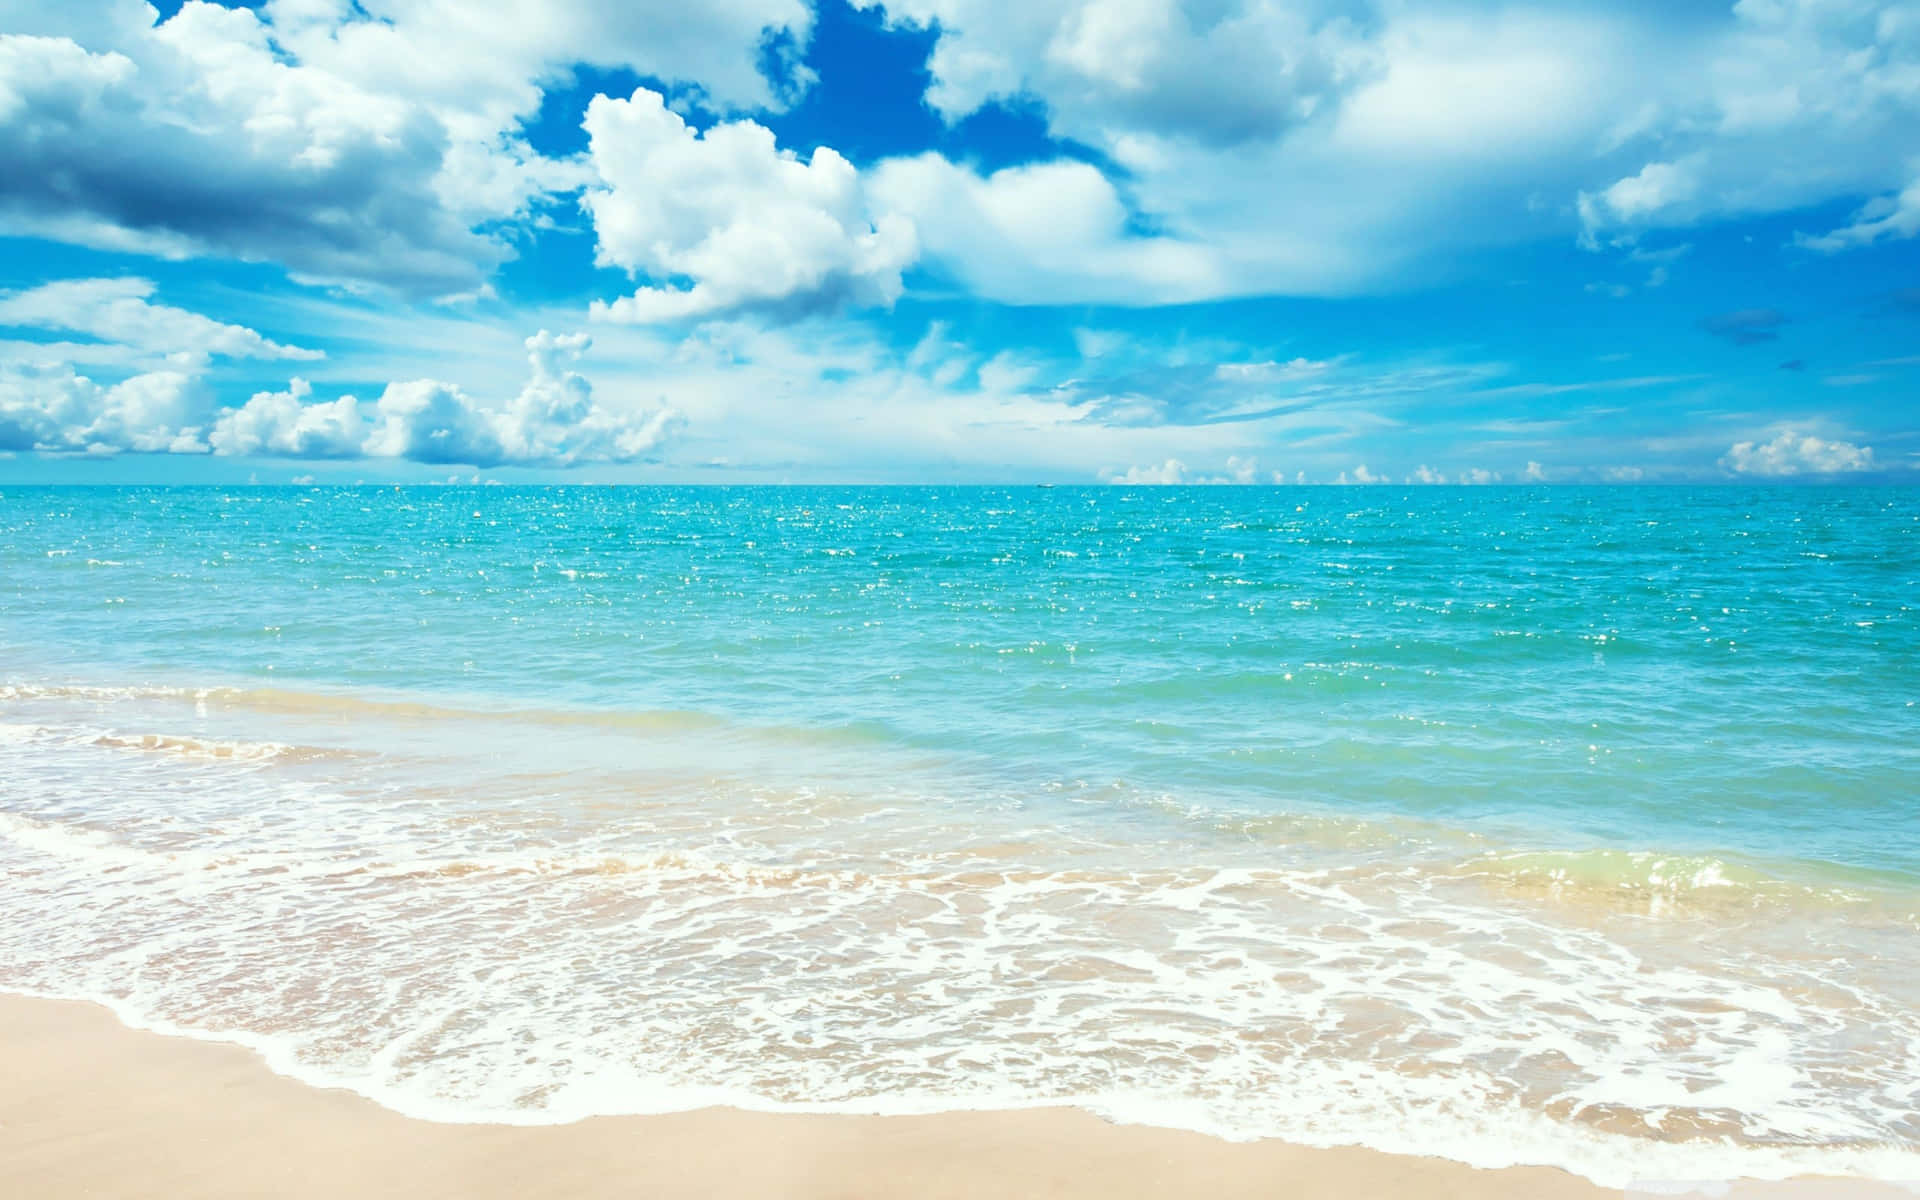 Take in the tranquil view of a stunning beach landscape